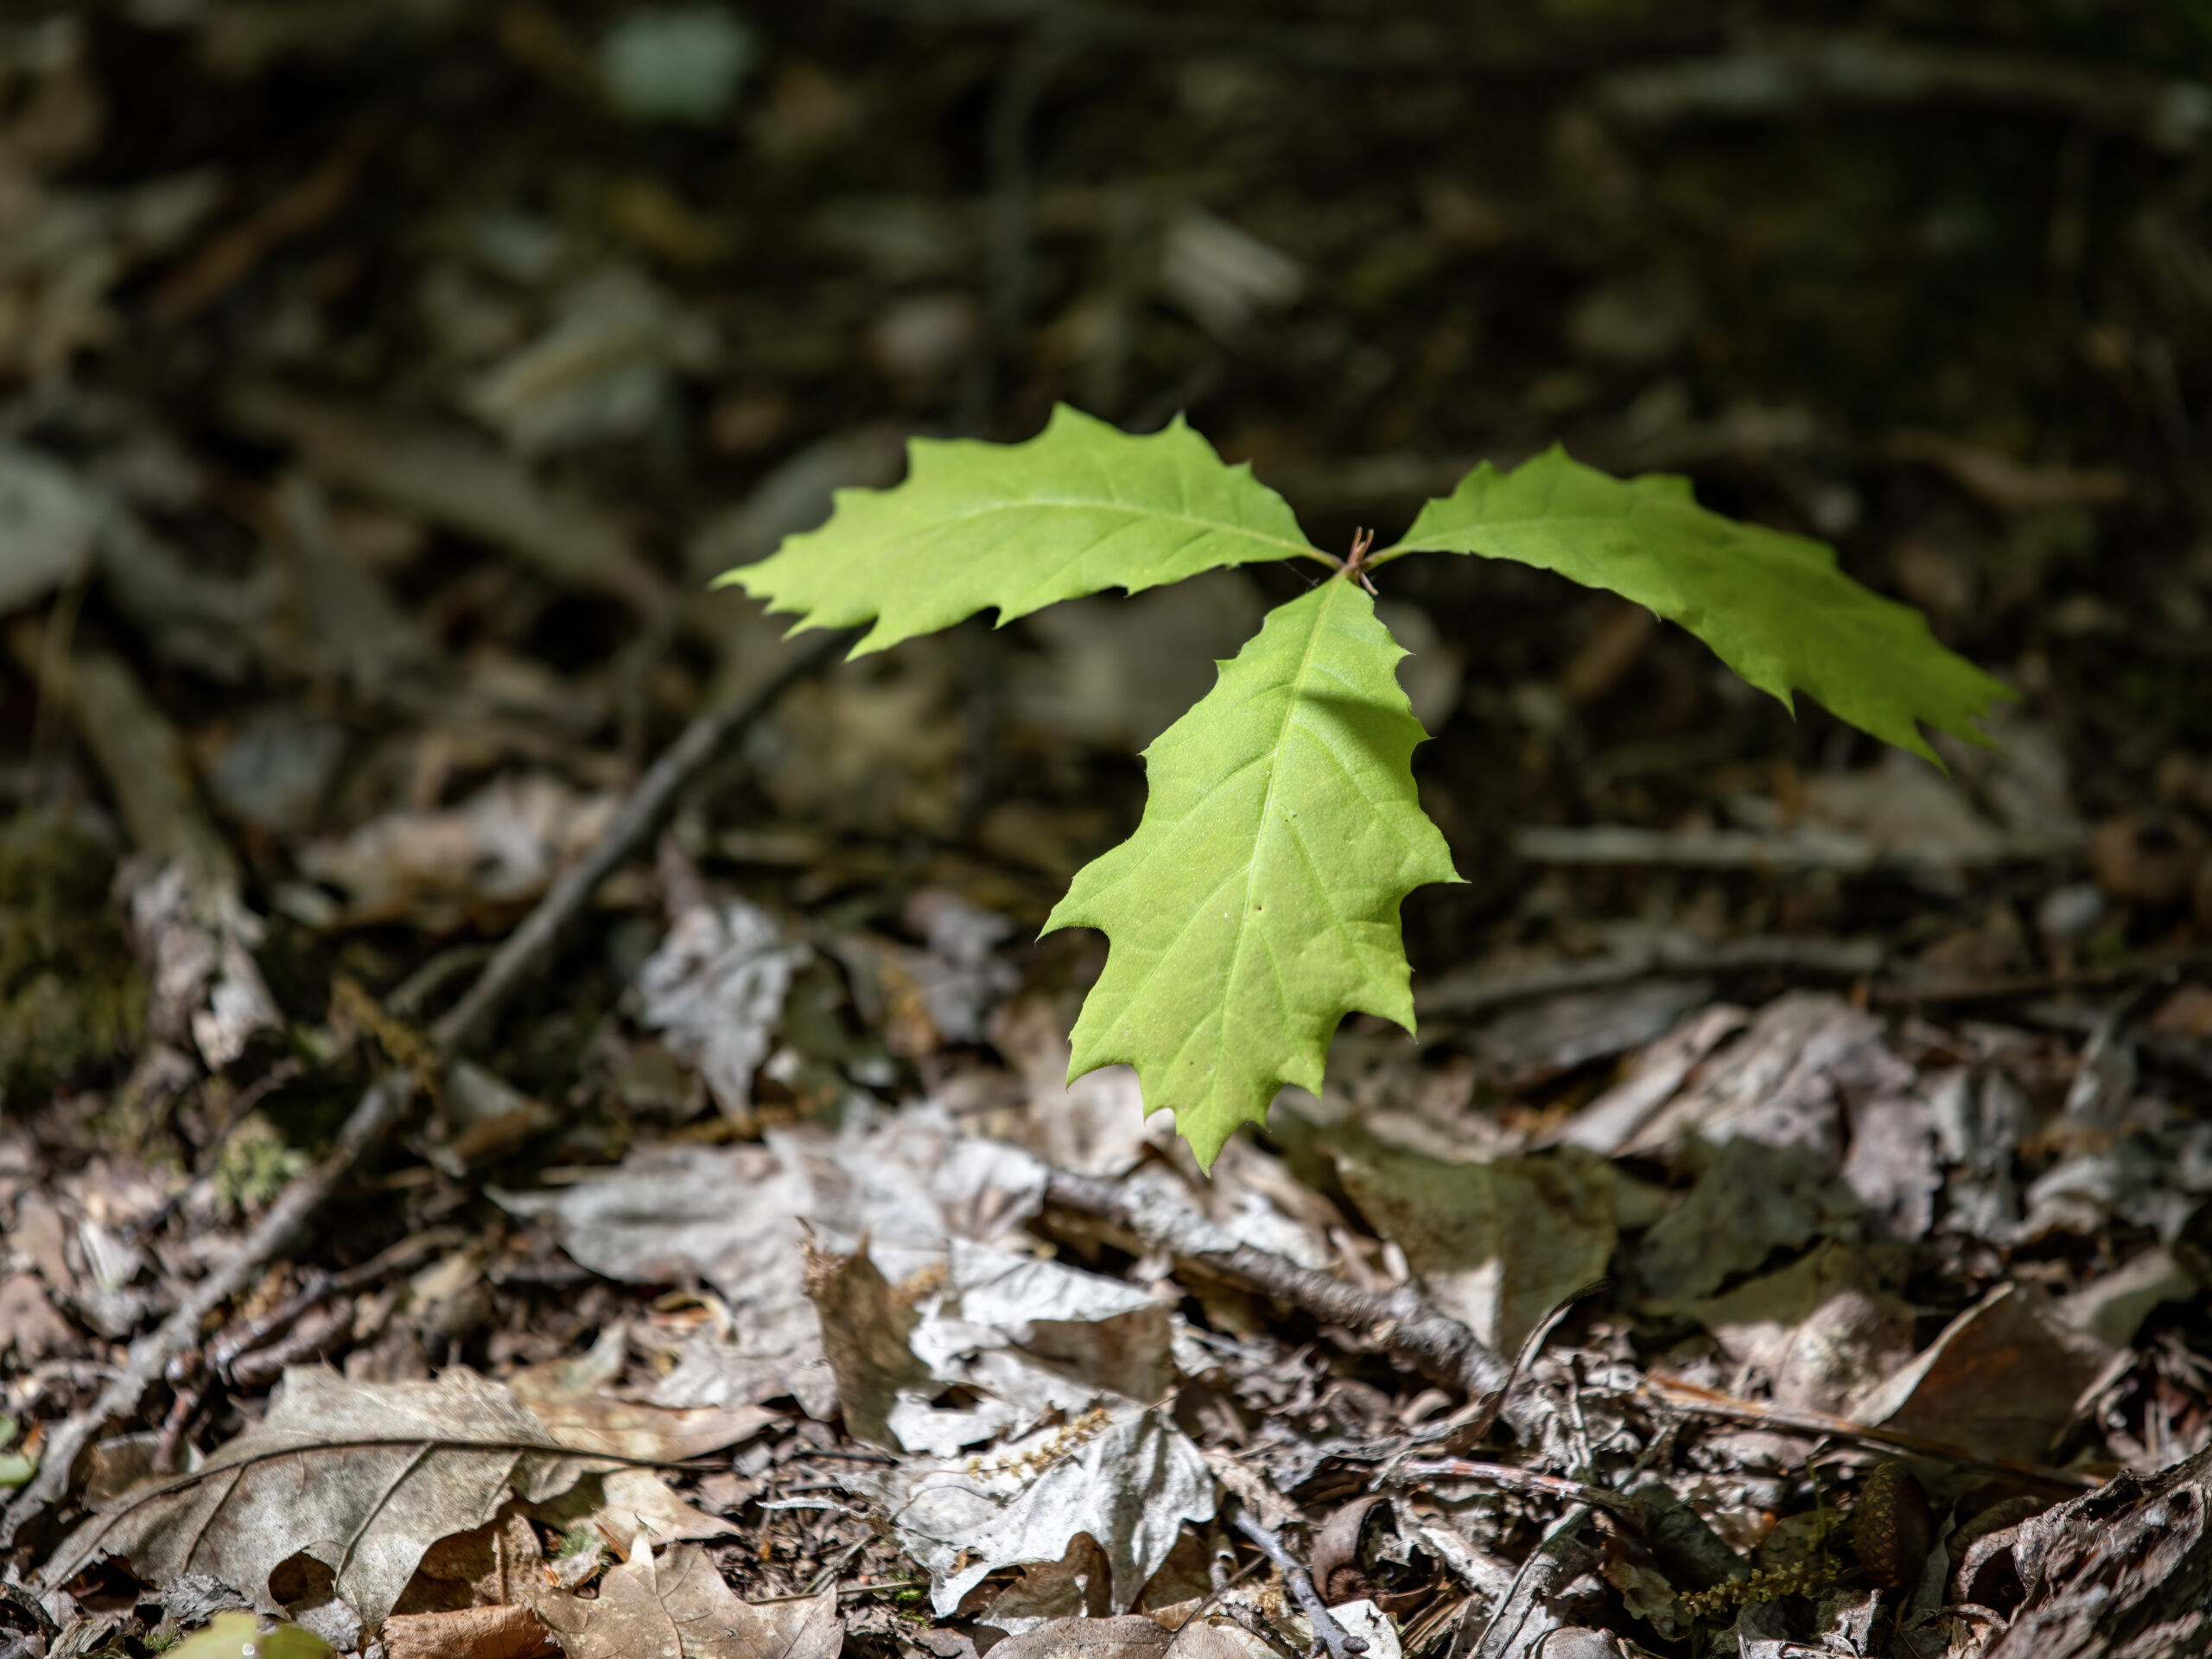 A tree sapling sporting three young leaves pokes out of the ground.